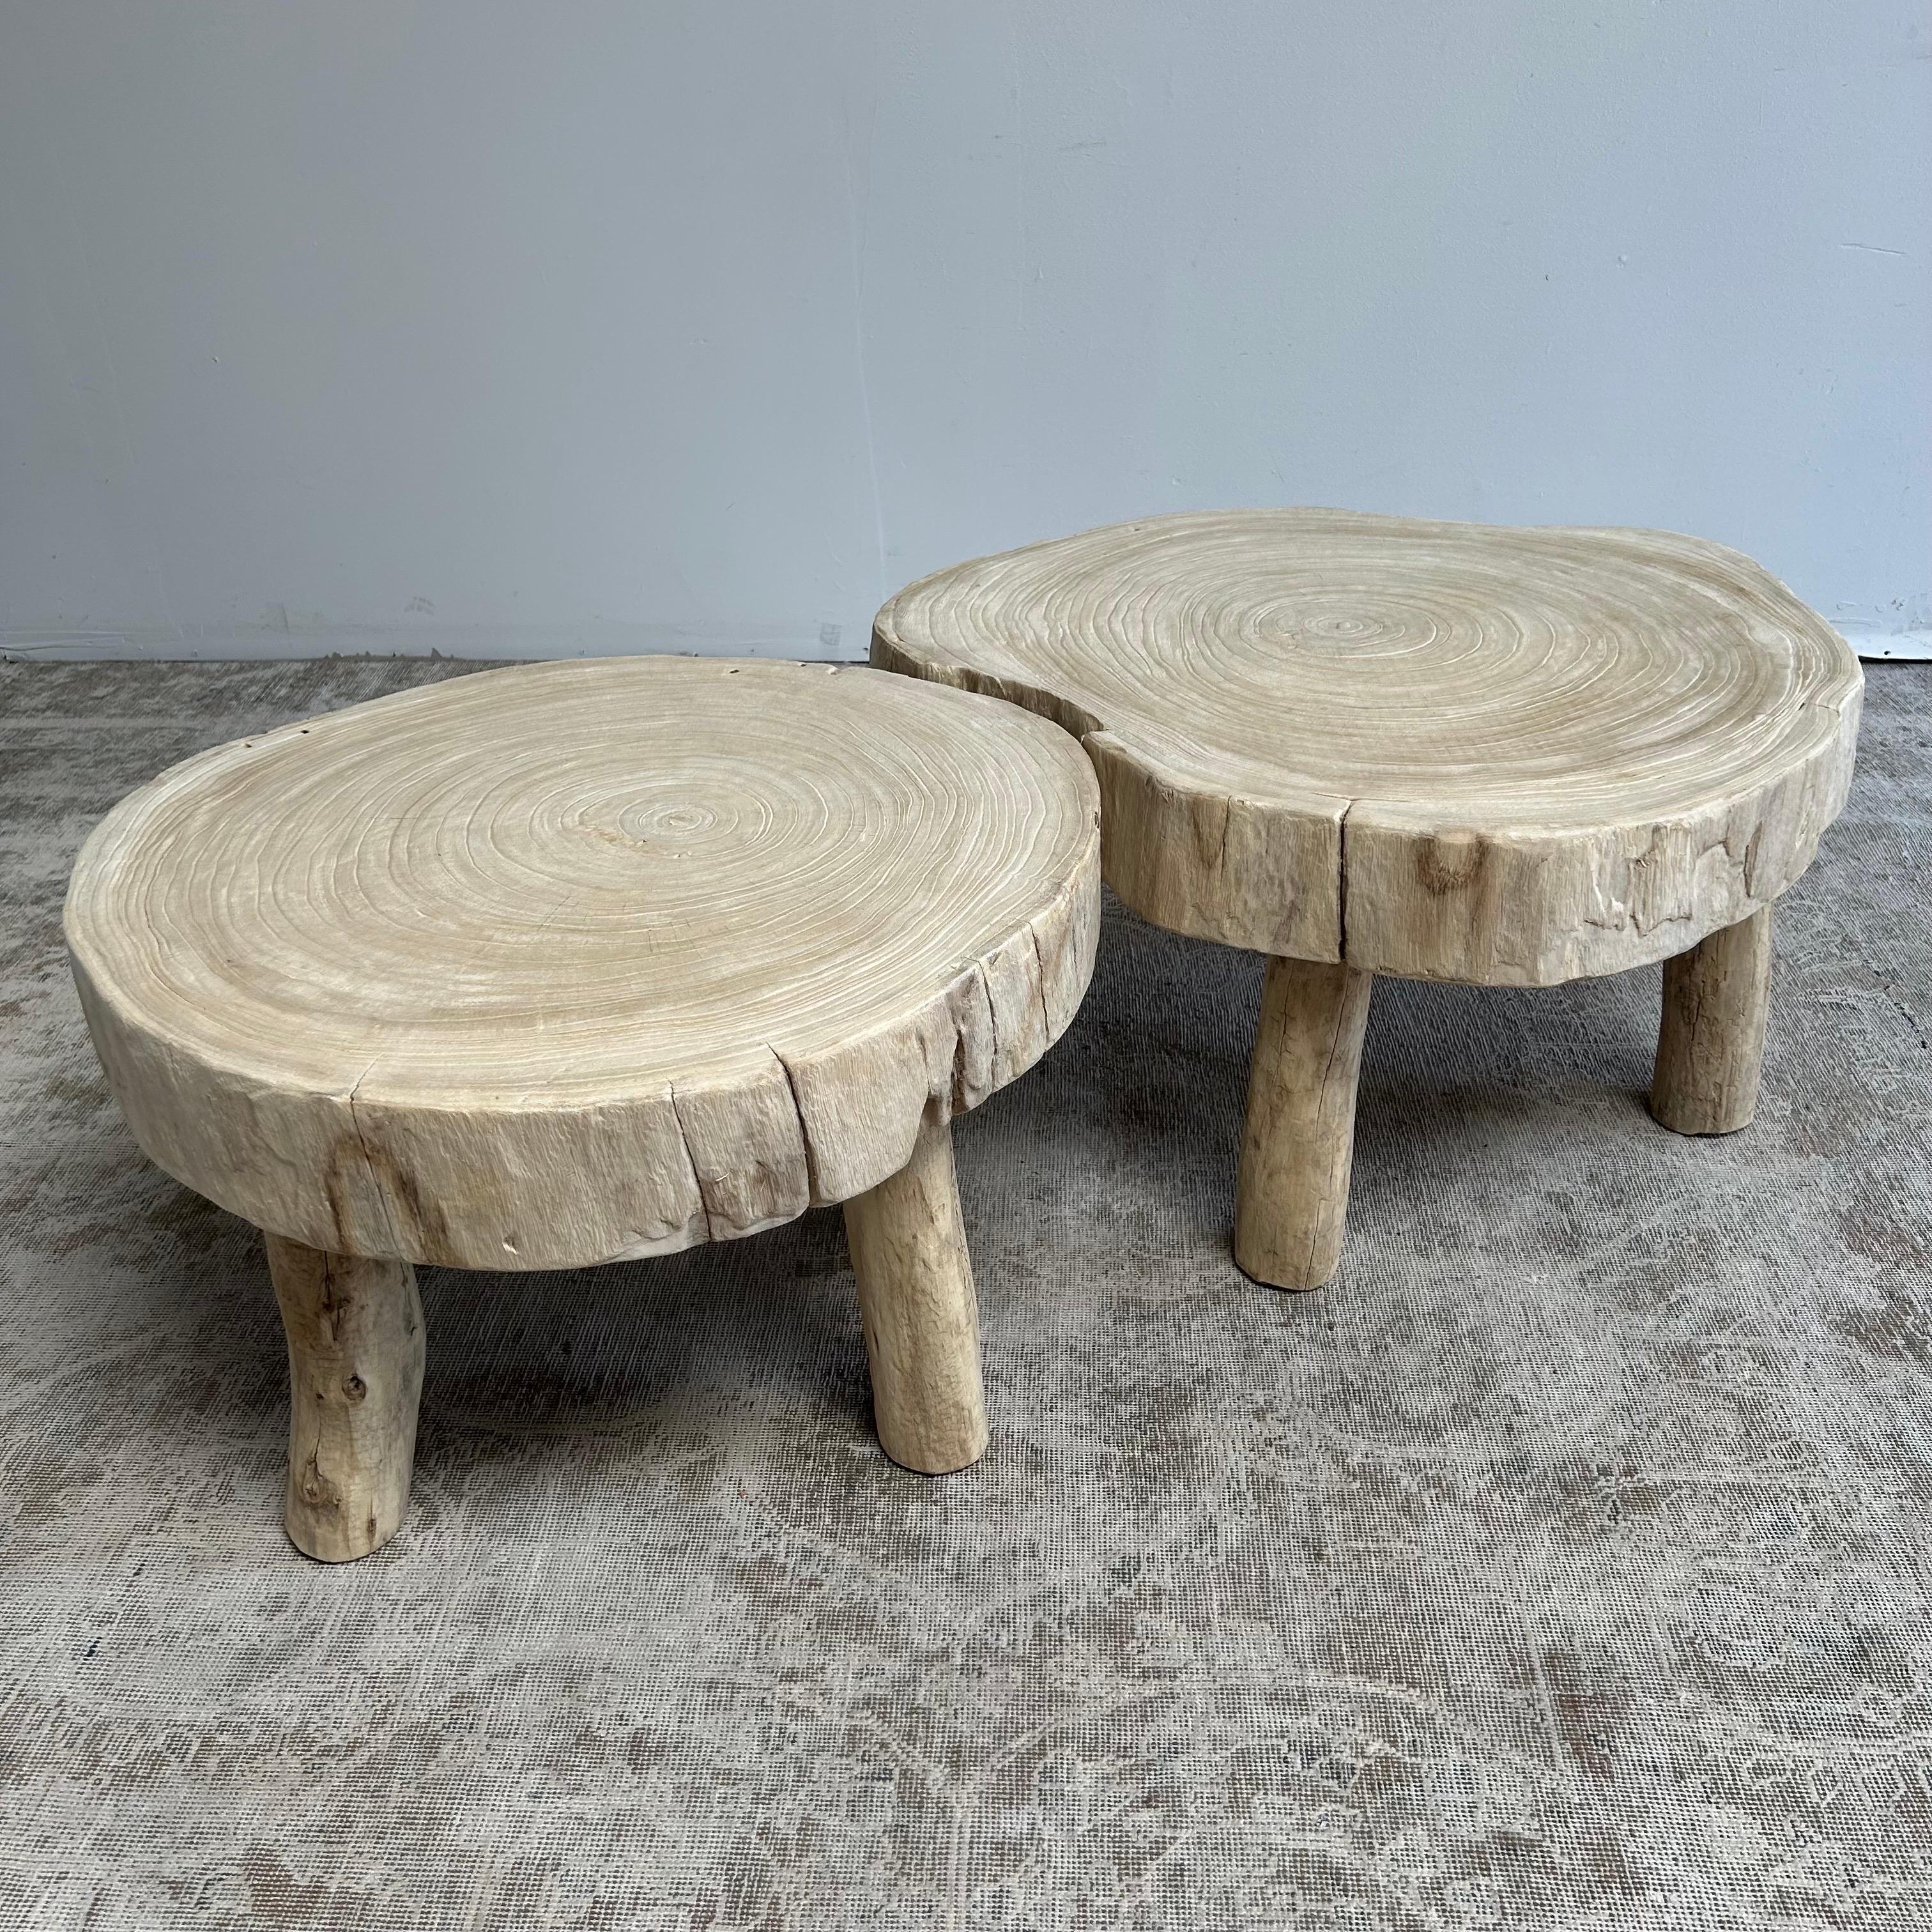 Cypress Wood Stump Slice Coffee Table Set In Good Condition For Sale In Brea, CA